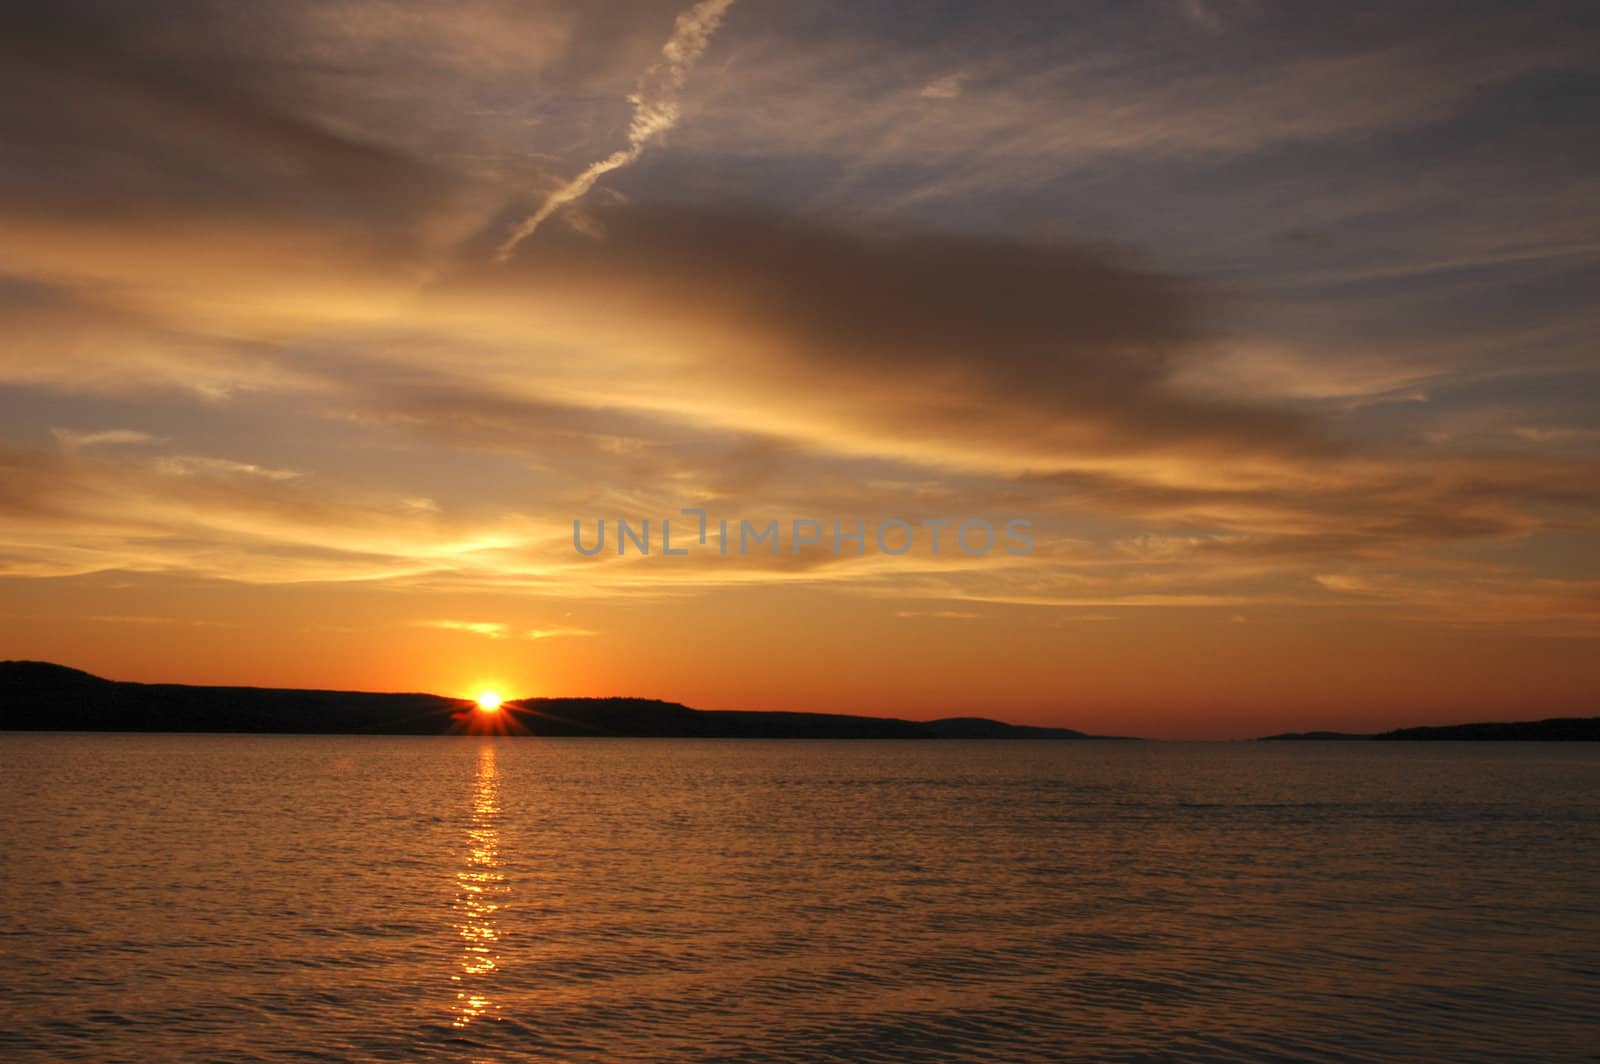 Northern Quebec sunset viewed from fishing boat